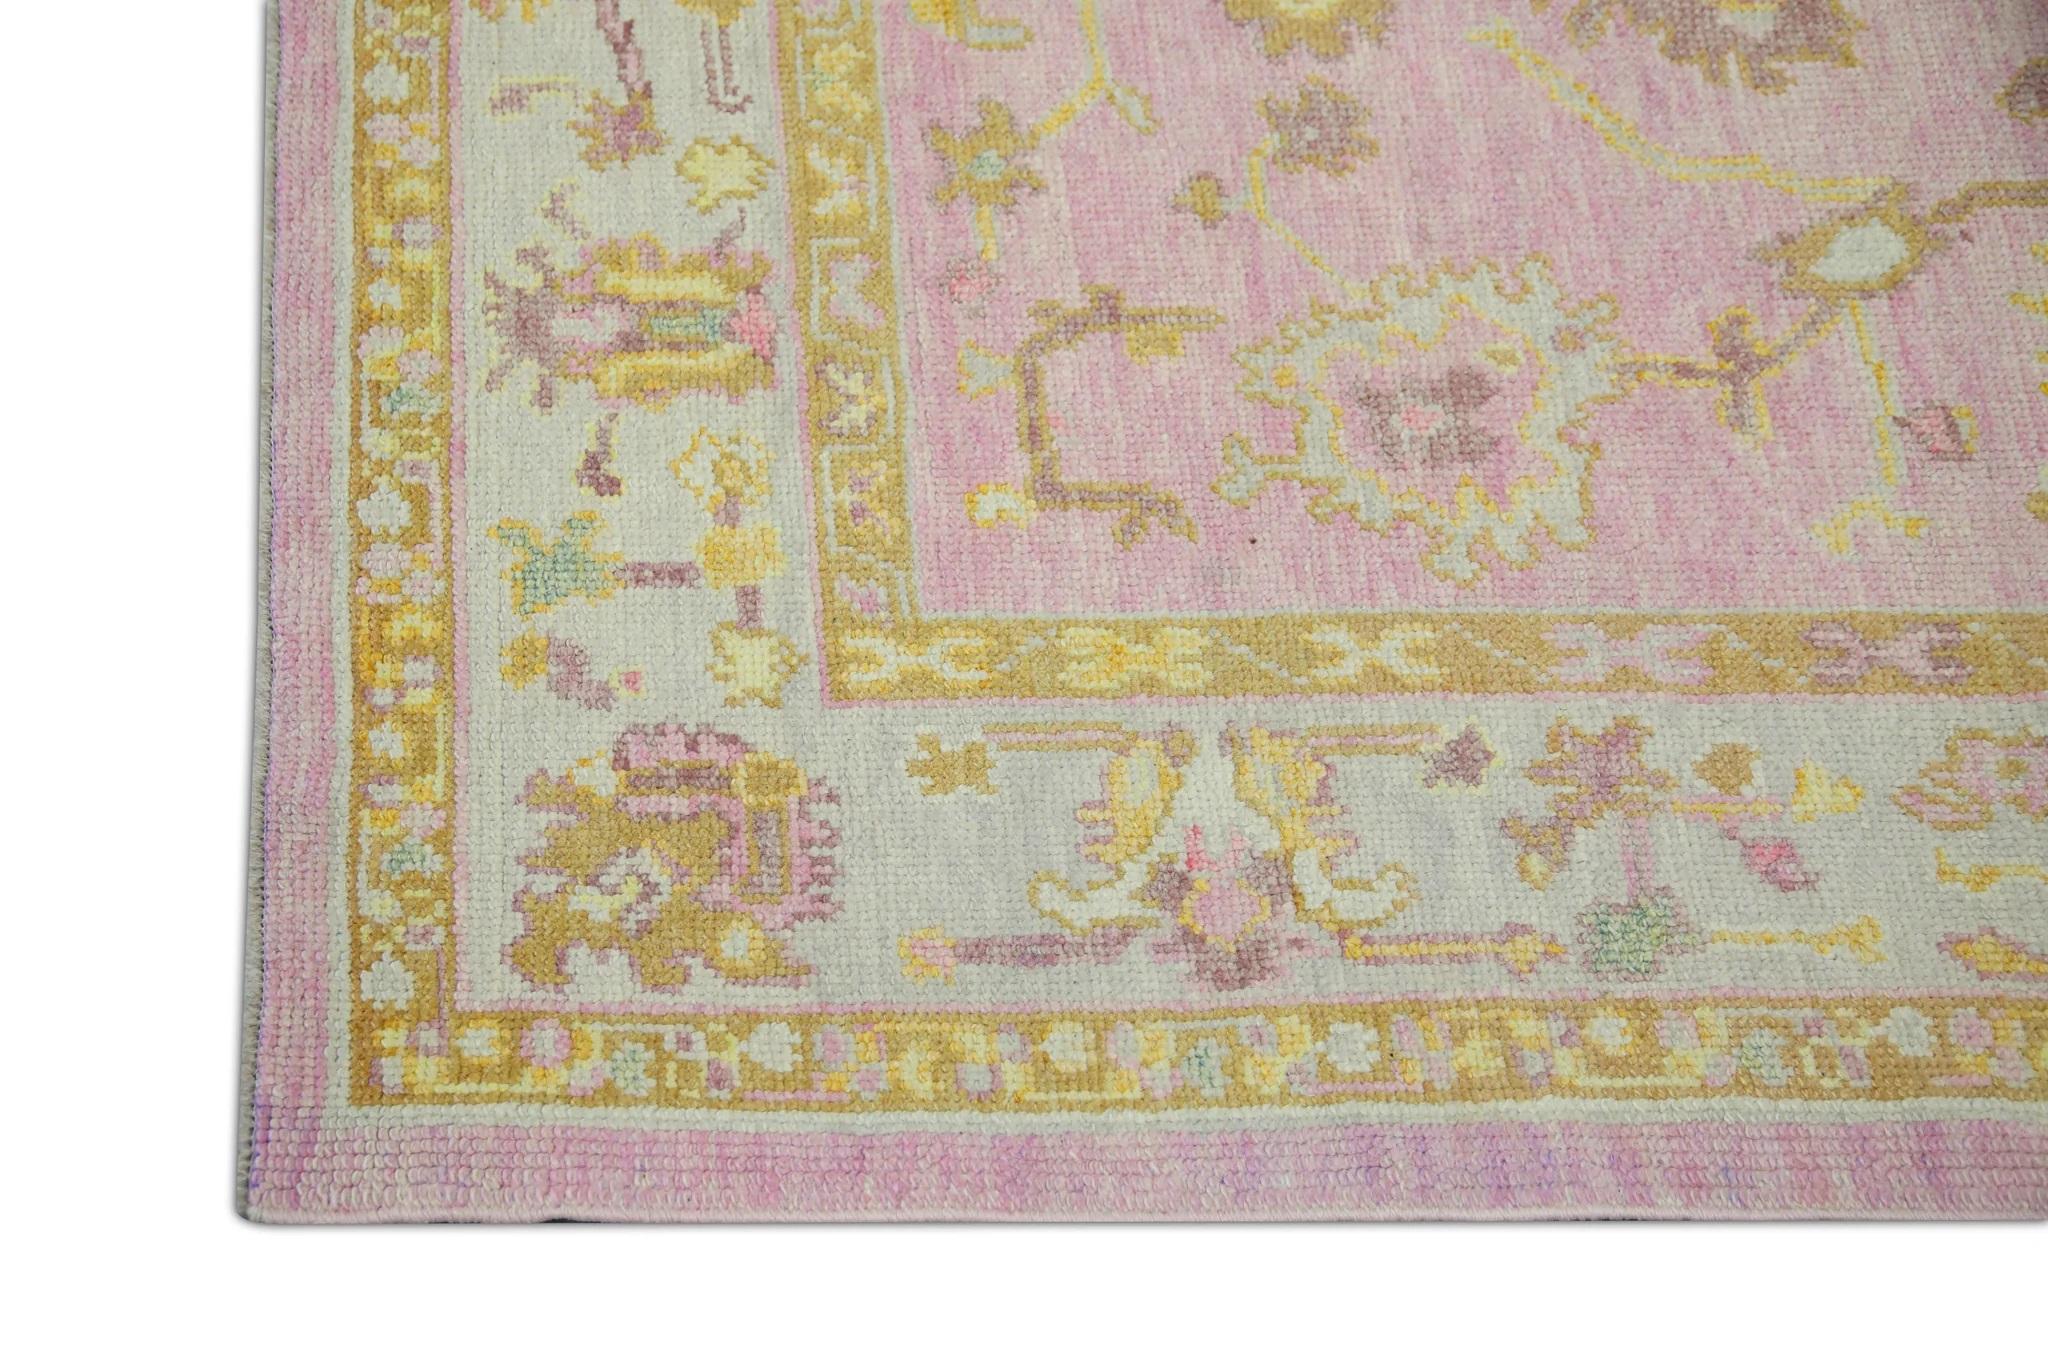 Vegetable Dyed Floral Handwoven Wool Turkish Oushak Rug in Soft Pink and Yellow 5'3